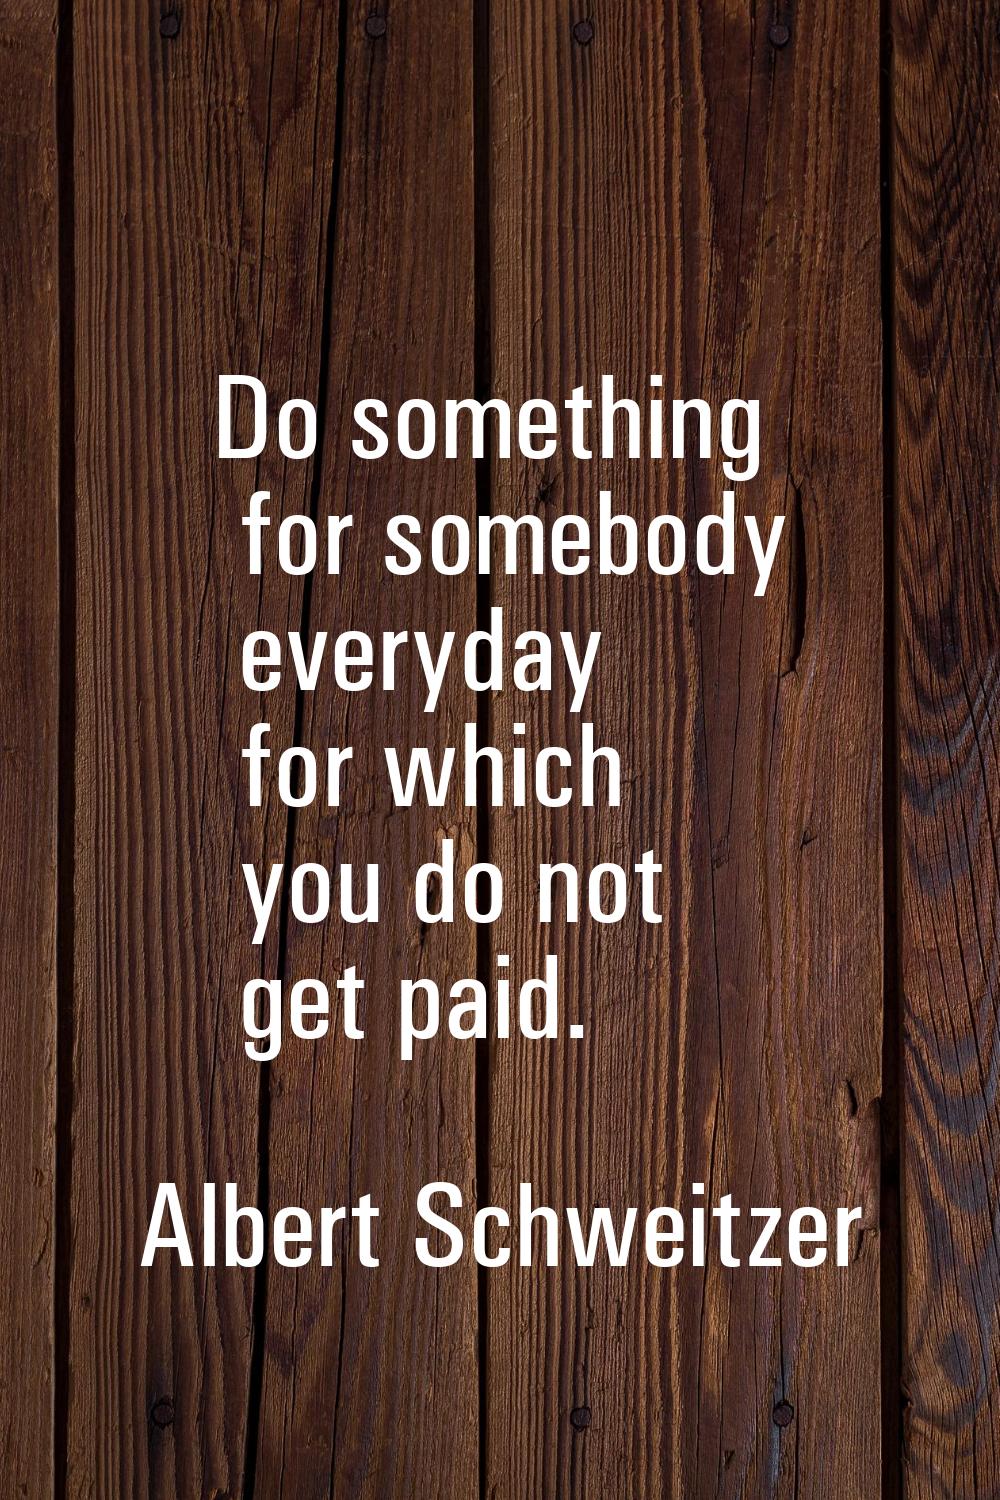 Do something for somebody everyday for which you do not get paid.